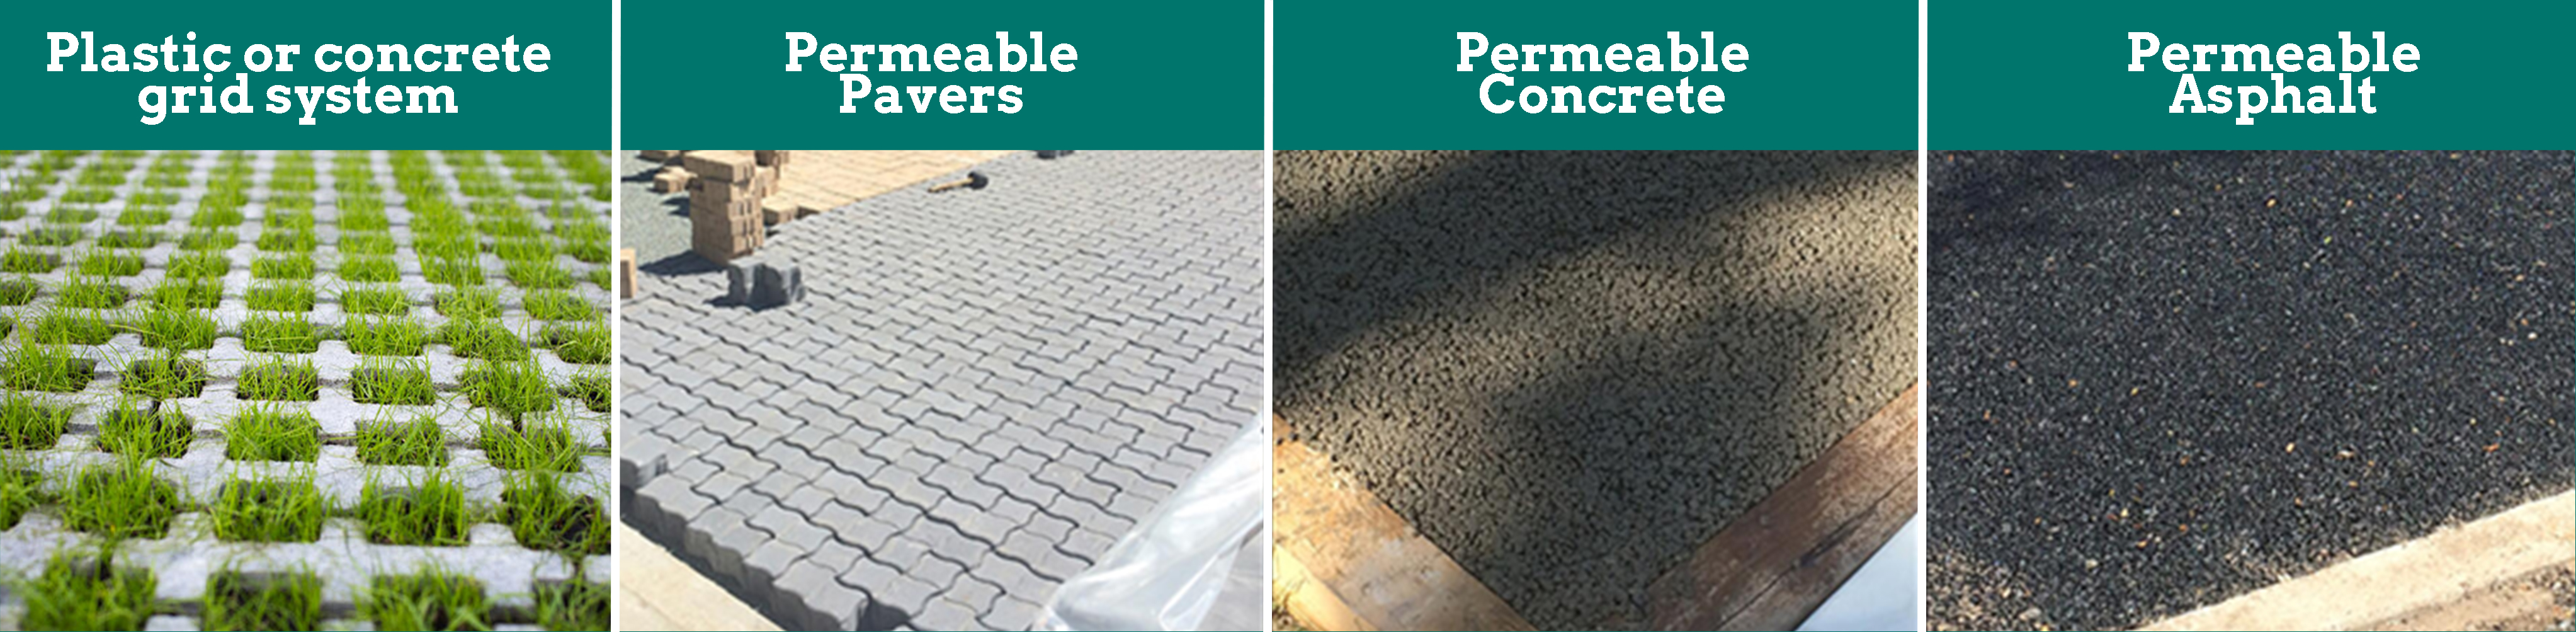 segmented image depicting 4 types of permeable pavement with labels - permeable asphalt, permeable concrete, permeable pavers, and platic or concrete grid system